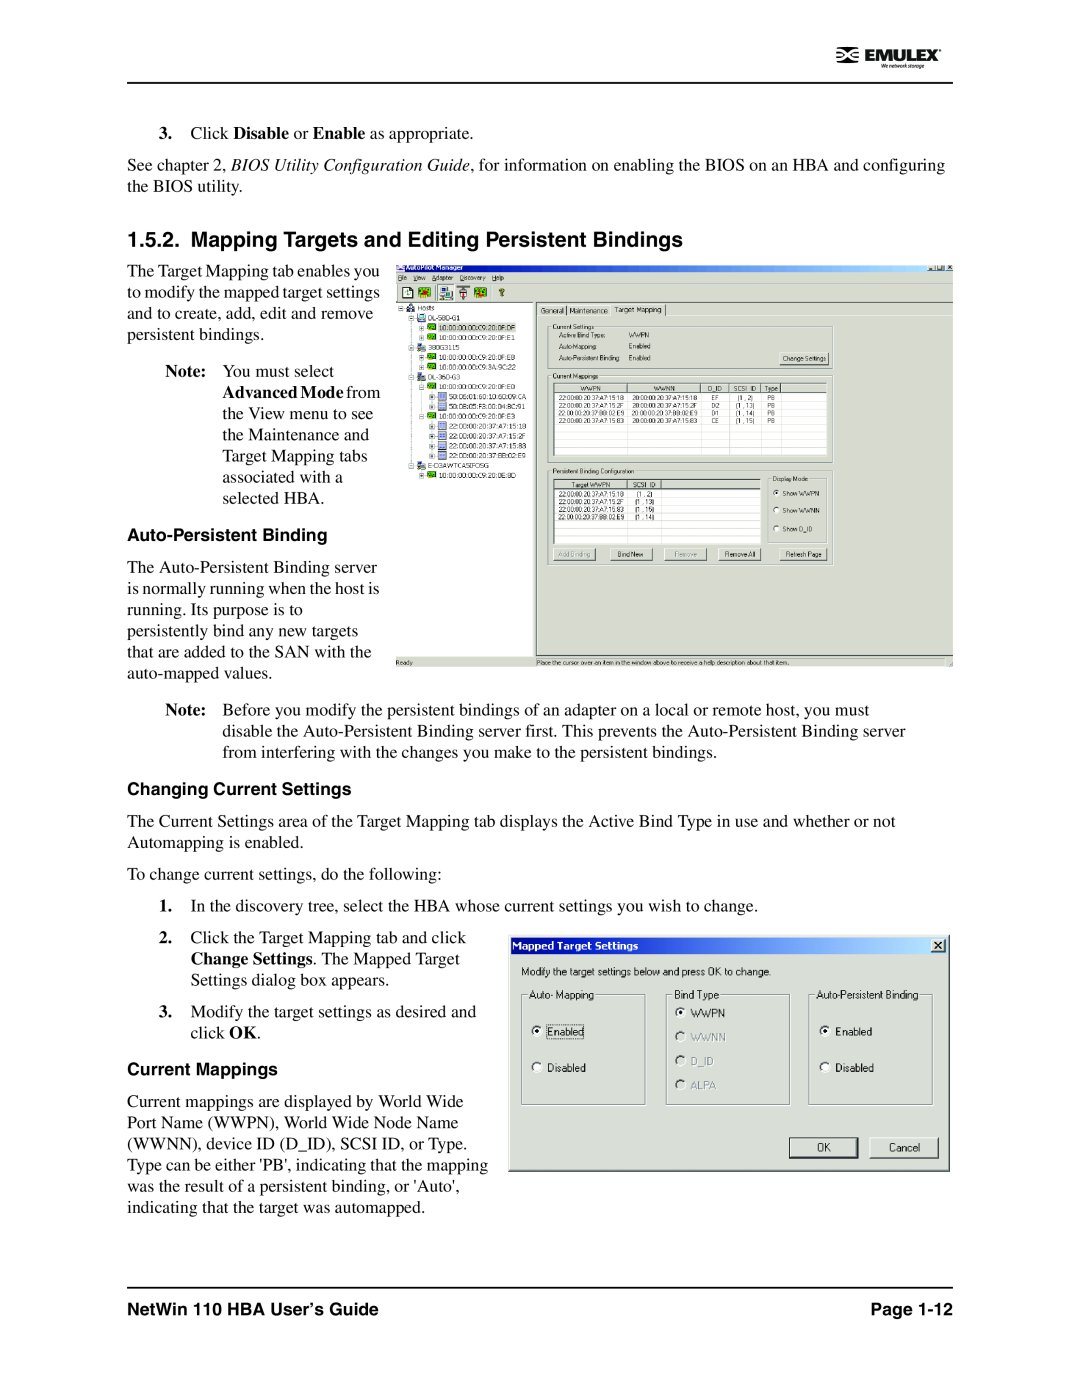 Emulex 110 manual Mapping Targets and Editing Persistent Bindings, Auto-Persistent Binding, Changing Current Settings, Page 